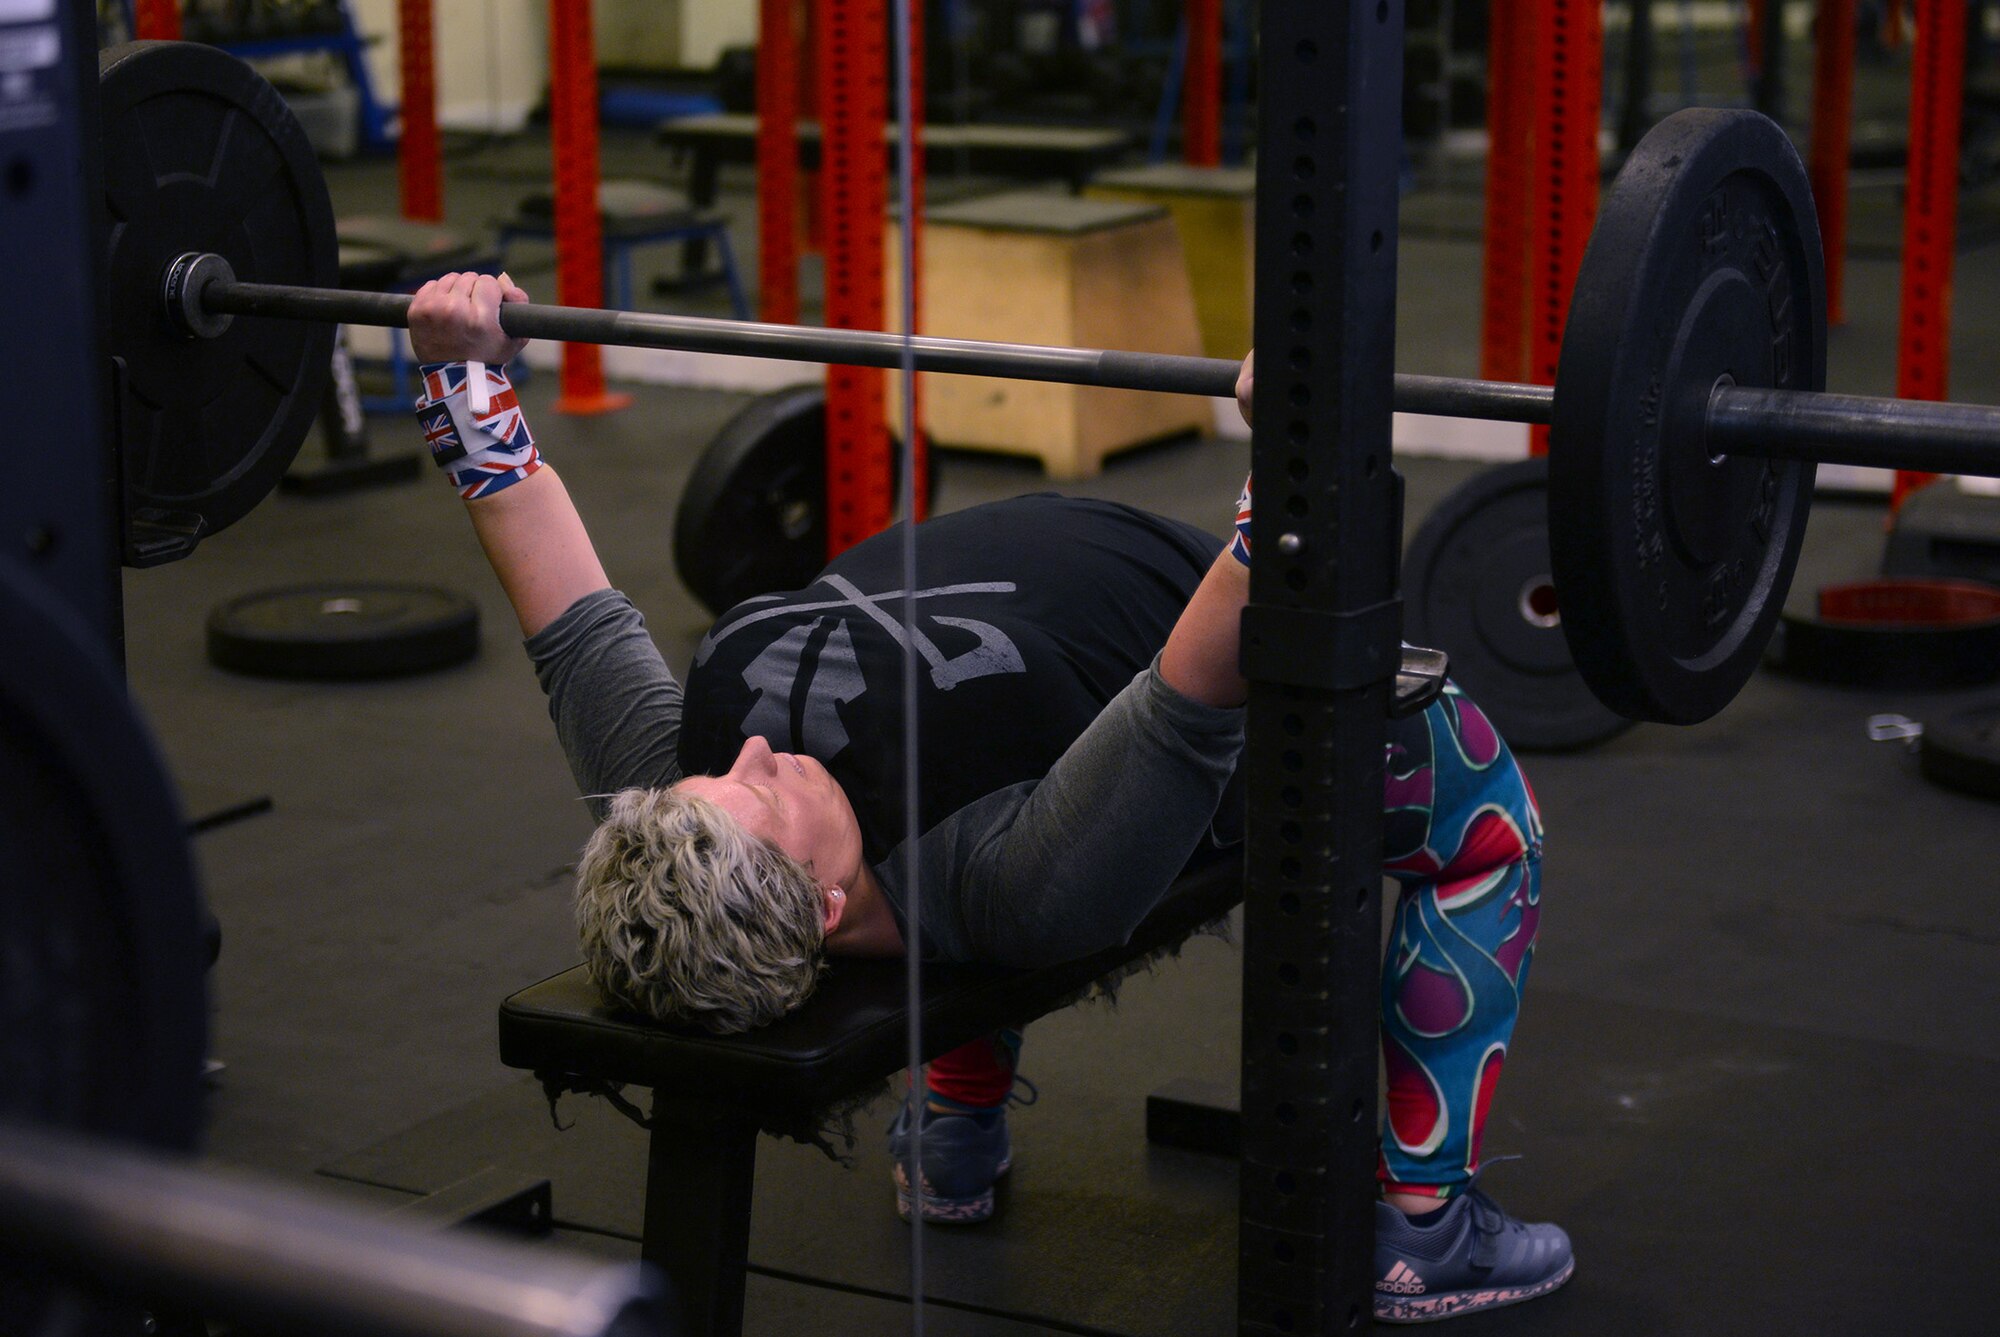 Sarah Marsden, 100th Civil Engineer Squadron environmental engineer, performs a bench press with some light weights during a workout session on RAF Mildenhall, England, March 26, 2019. Marsden is a champion powerlifter, and has earned medals from British, European and World Championships. (U.S. Air Force photo by Karen Abeyasekere)